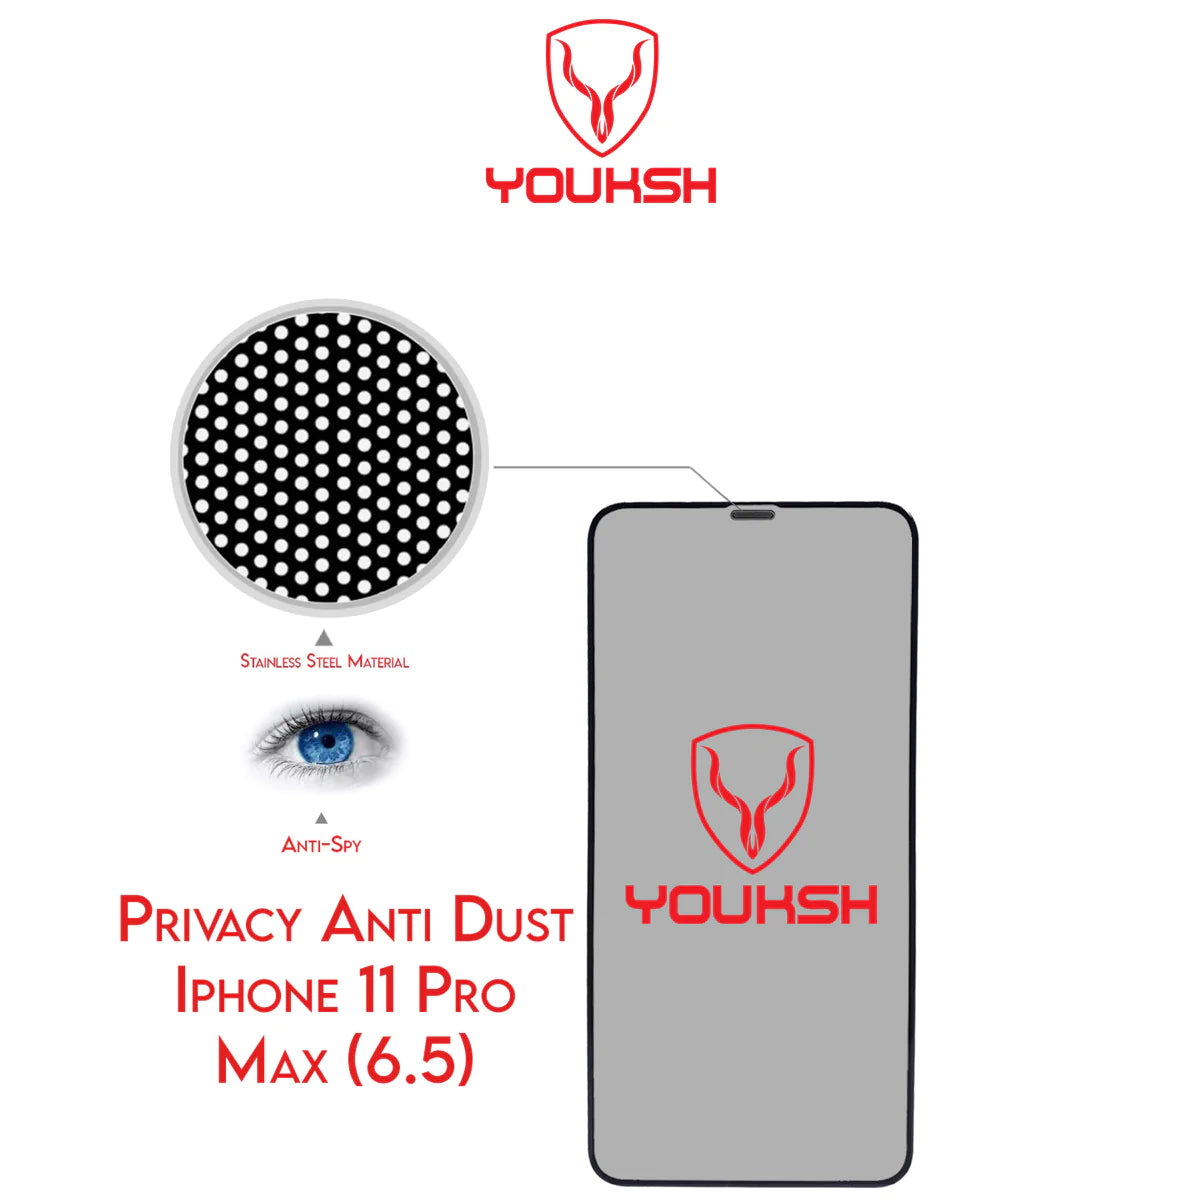 YOUKSH Apple iPhone 11 Pro Max Anti Static Glass Protector With YOUKSH Installation Kit